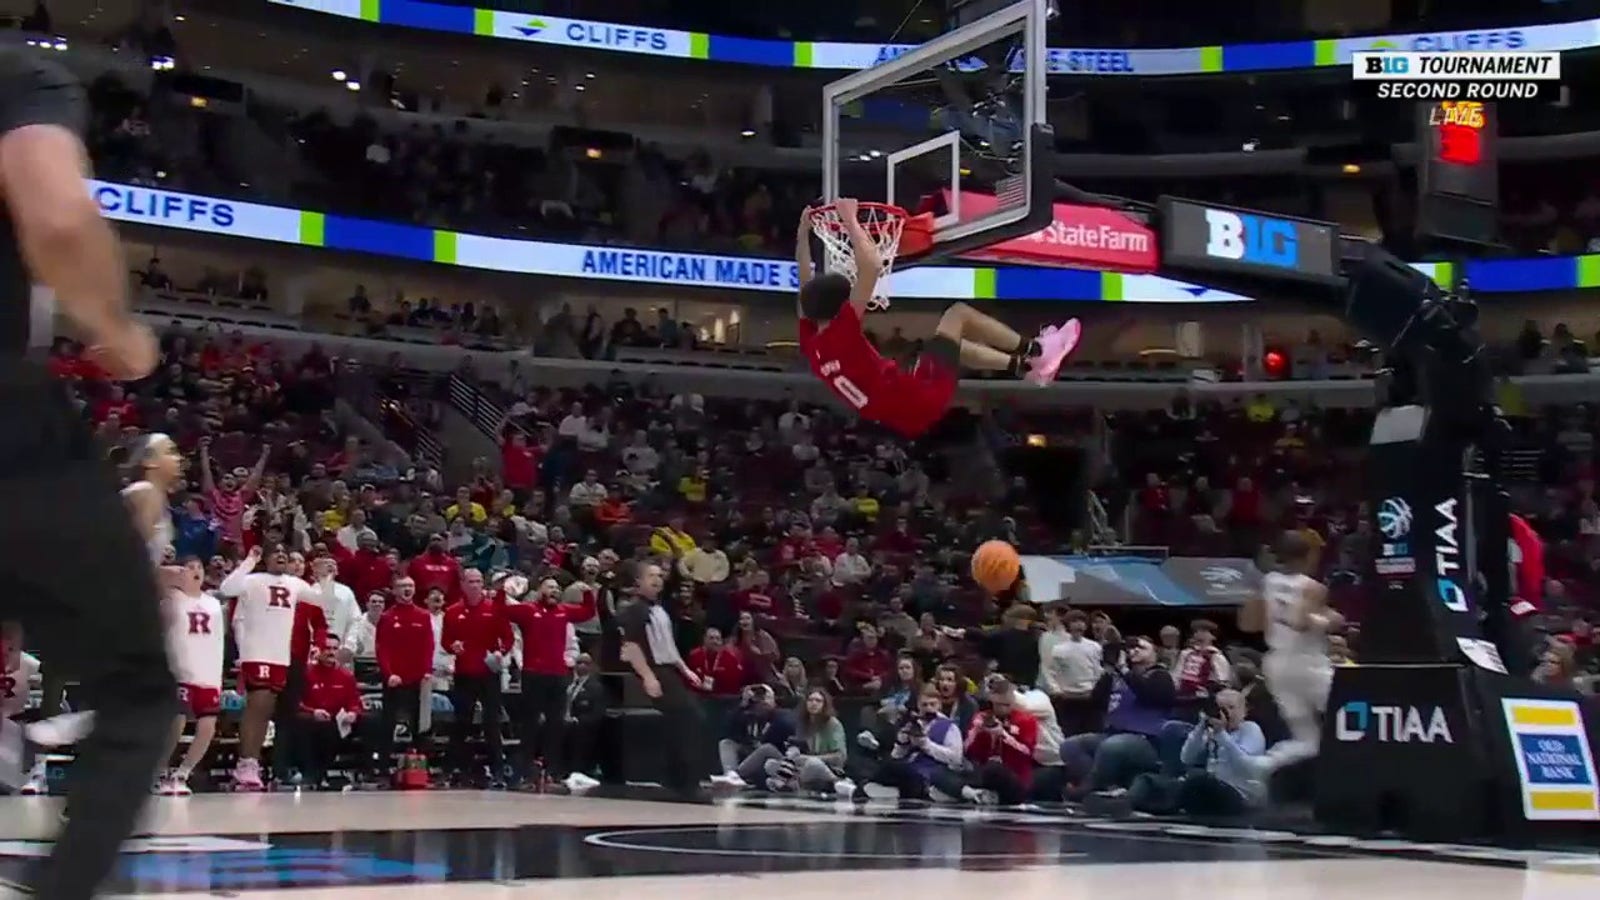 Rutgers' Derek Simpson goes SKY HIGH and makes a nice two-handed dunk against Michigan